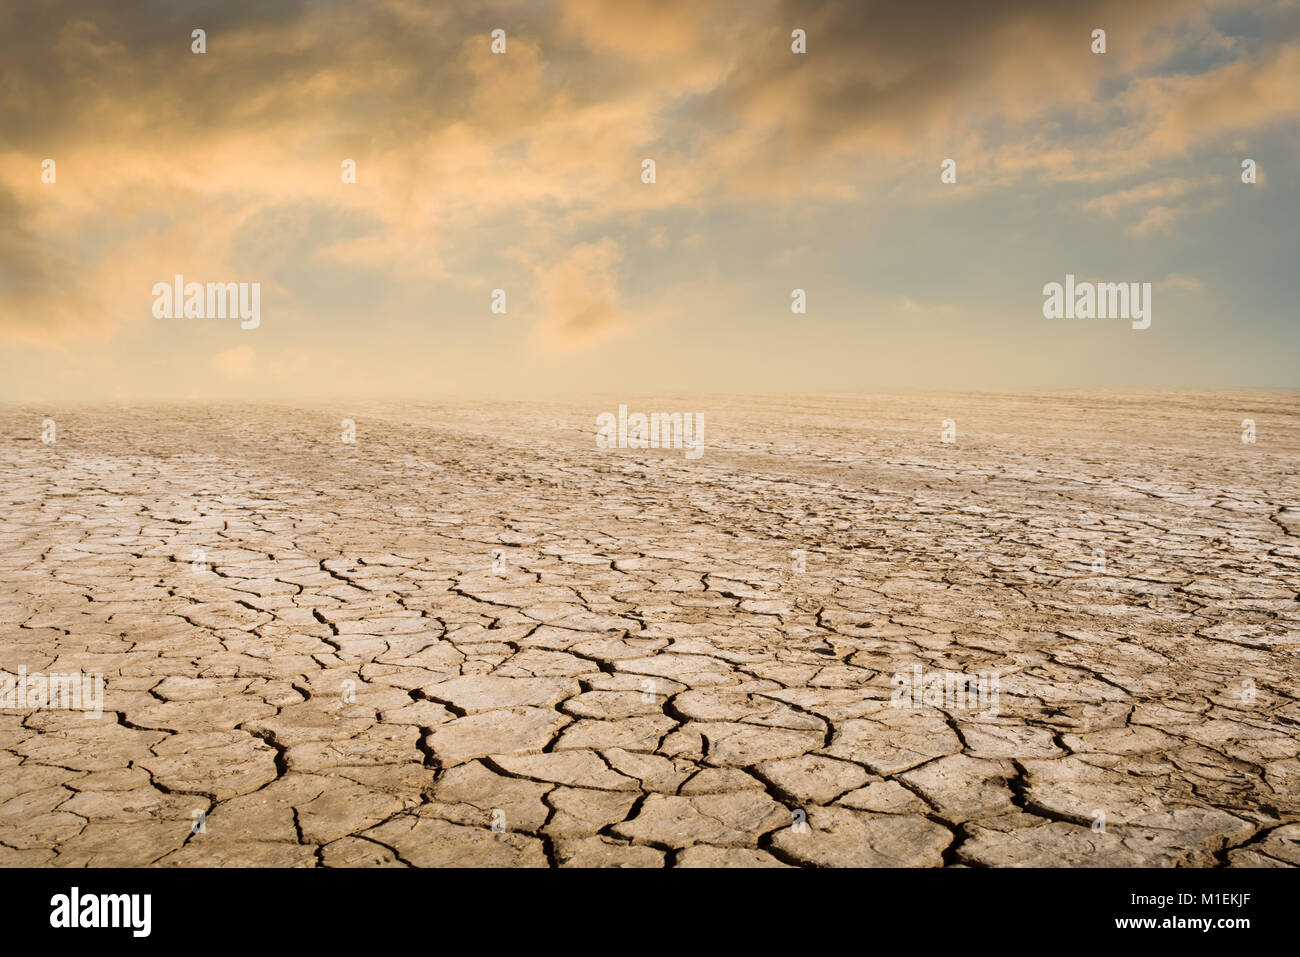 Drought land against a sunset sky with clouds Stock Photo